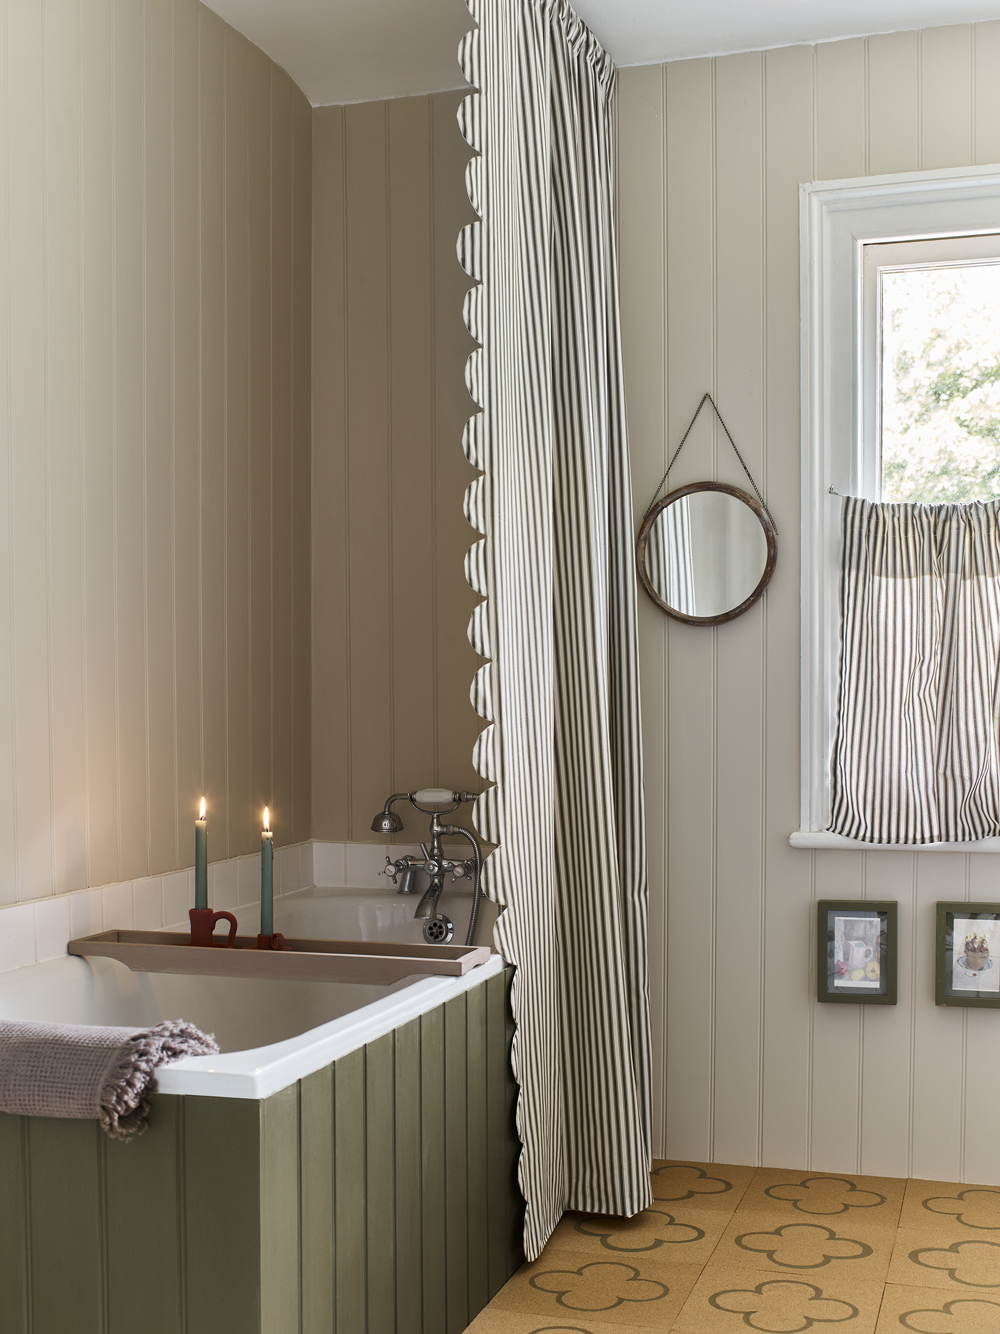 Soft, Romantic Style Bathroom featuring Bathtub painted in Chalk Paint in Olive, Olive in Ticking Shower Scalloped Shower Curtain and Canvas Wall Paint